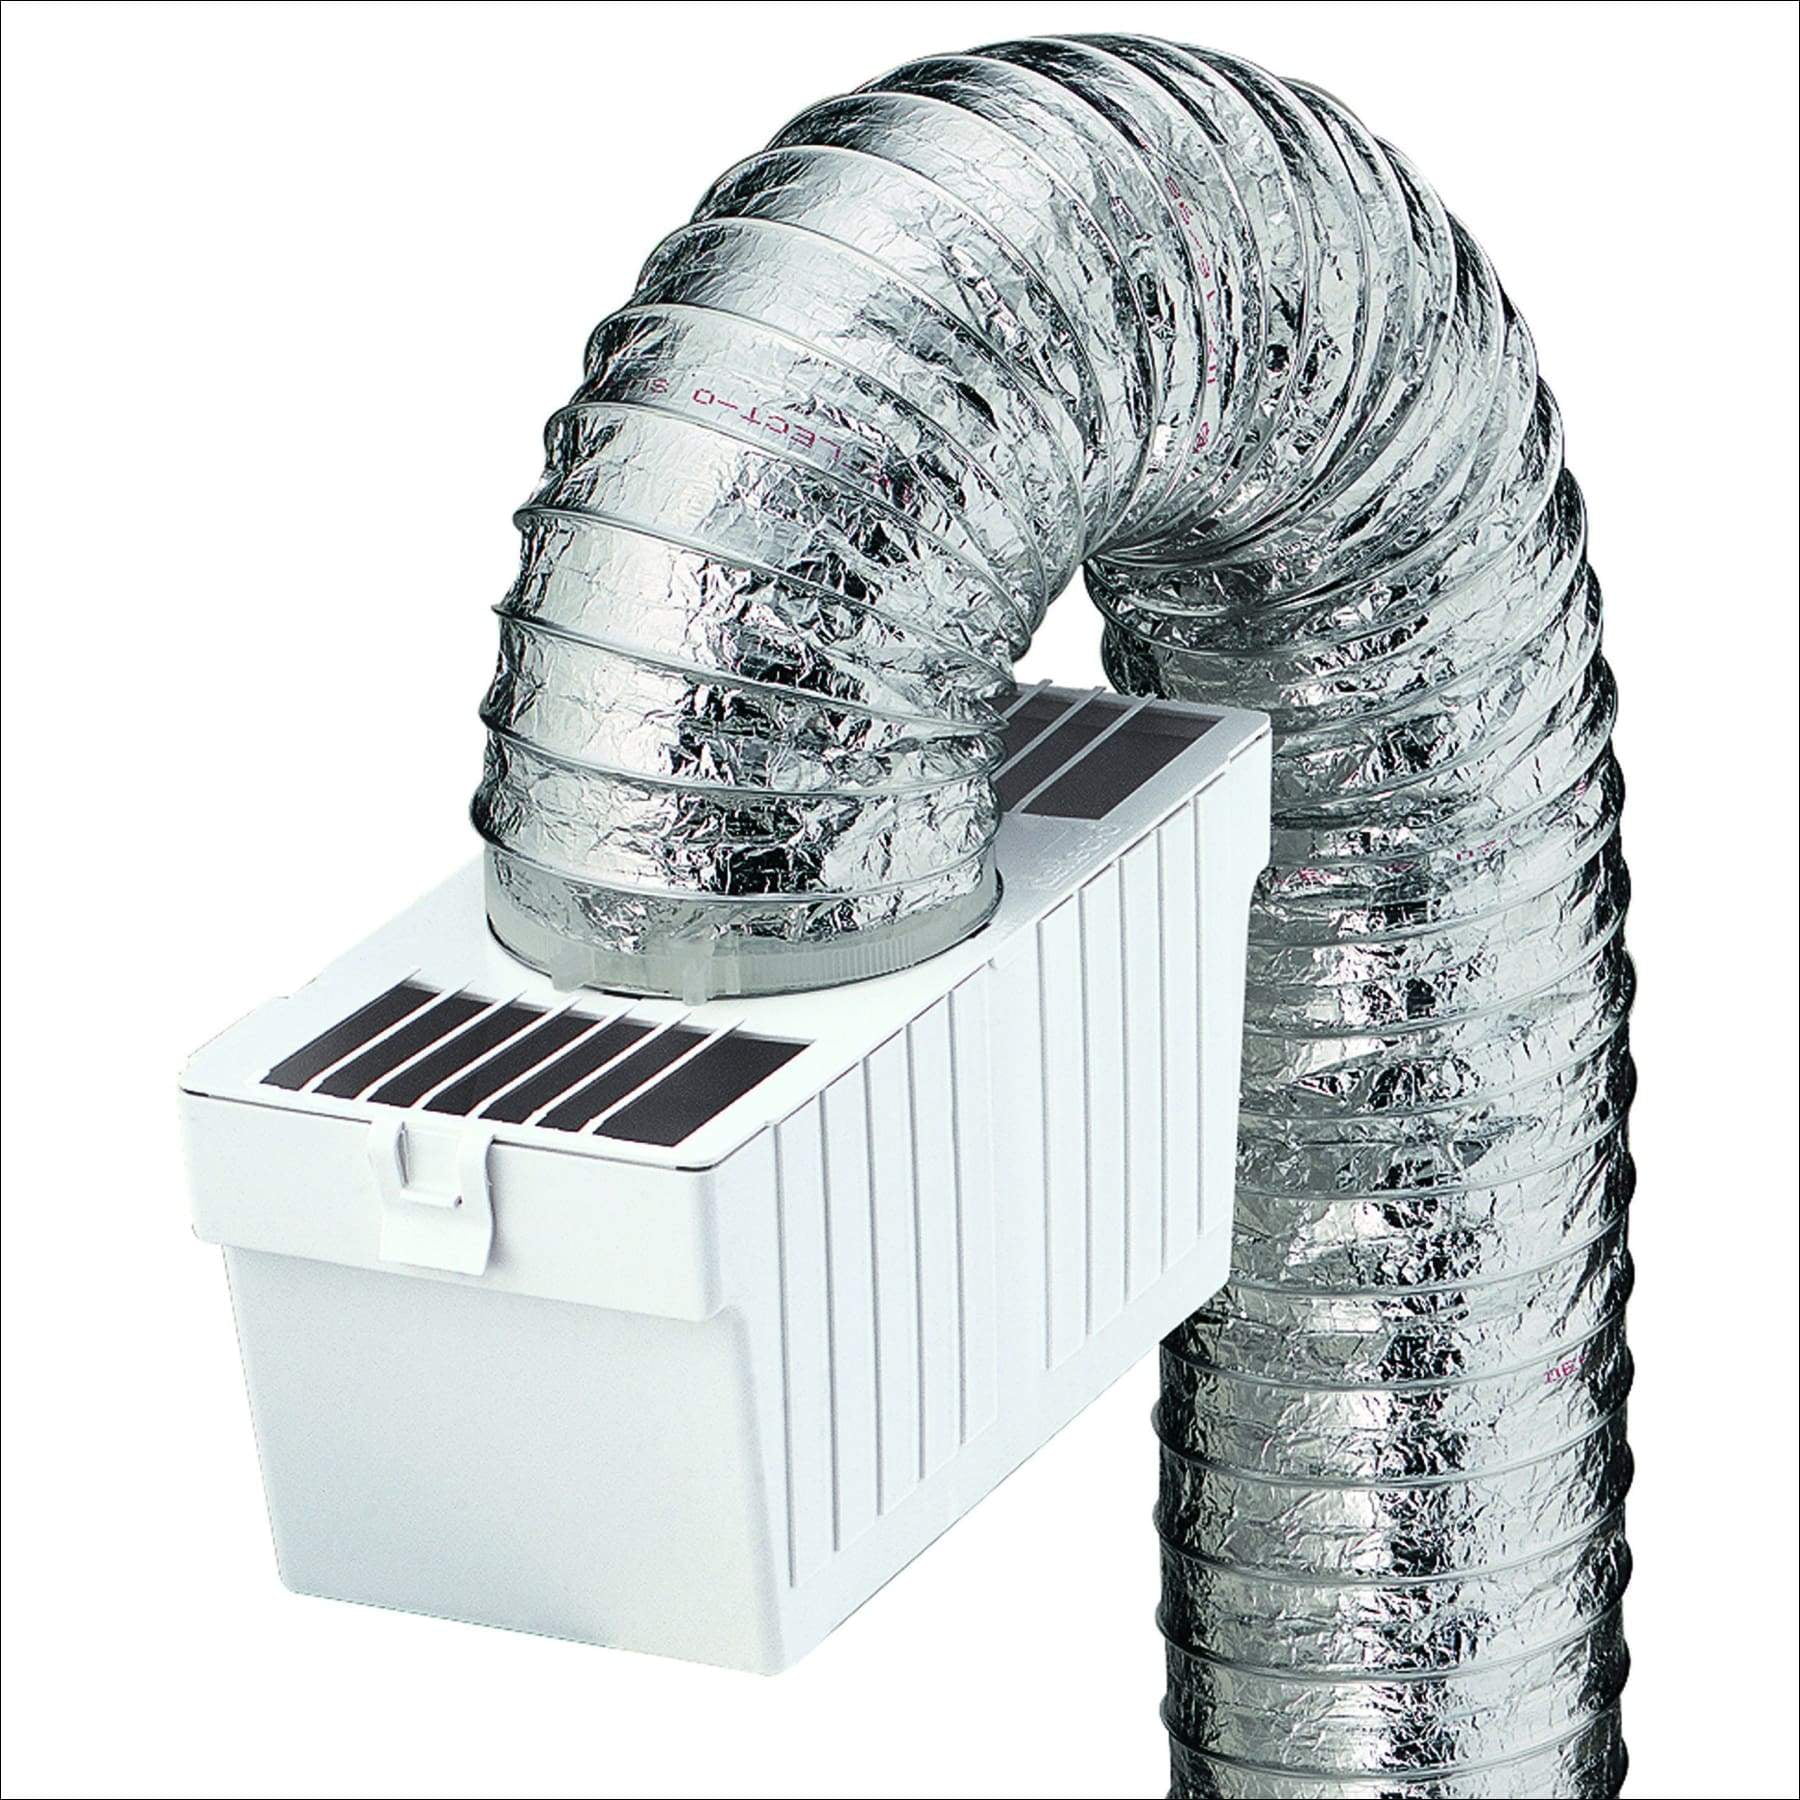 White Deflecto Extra Heat Dryer Saver Accommodates 4 Transition Ducts Includes 2 4 Plastic Clamps EX12